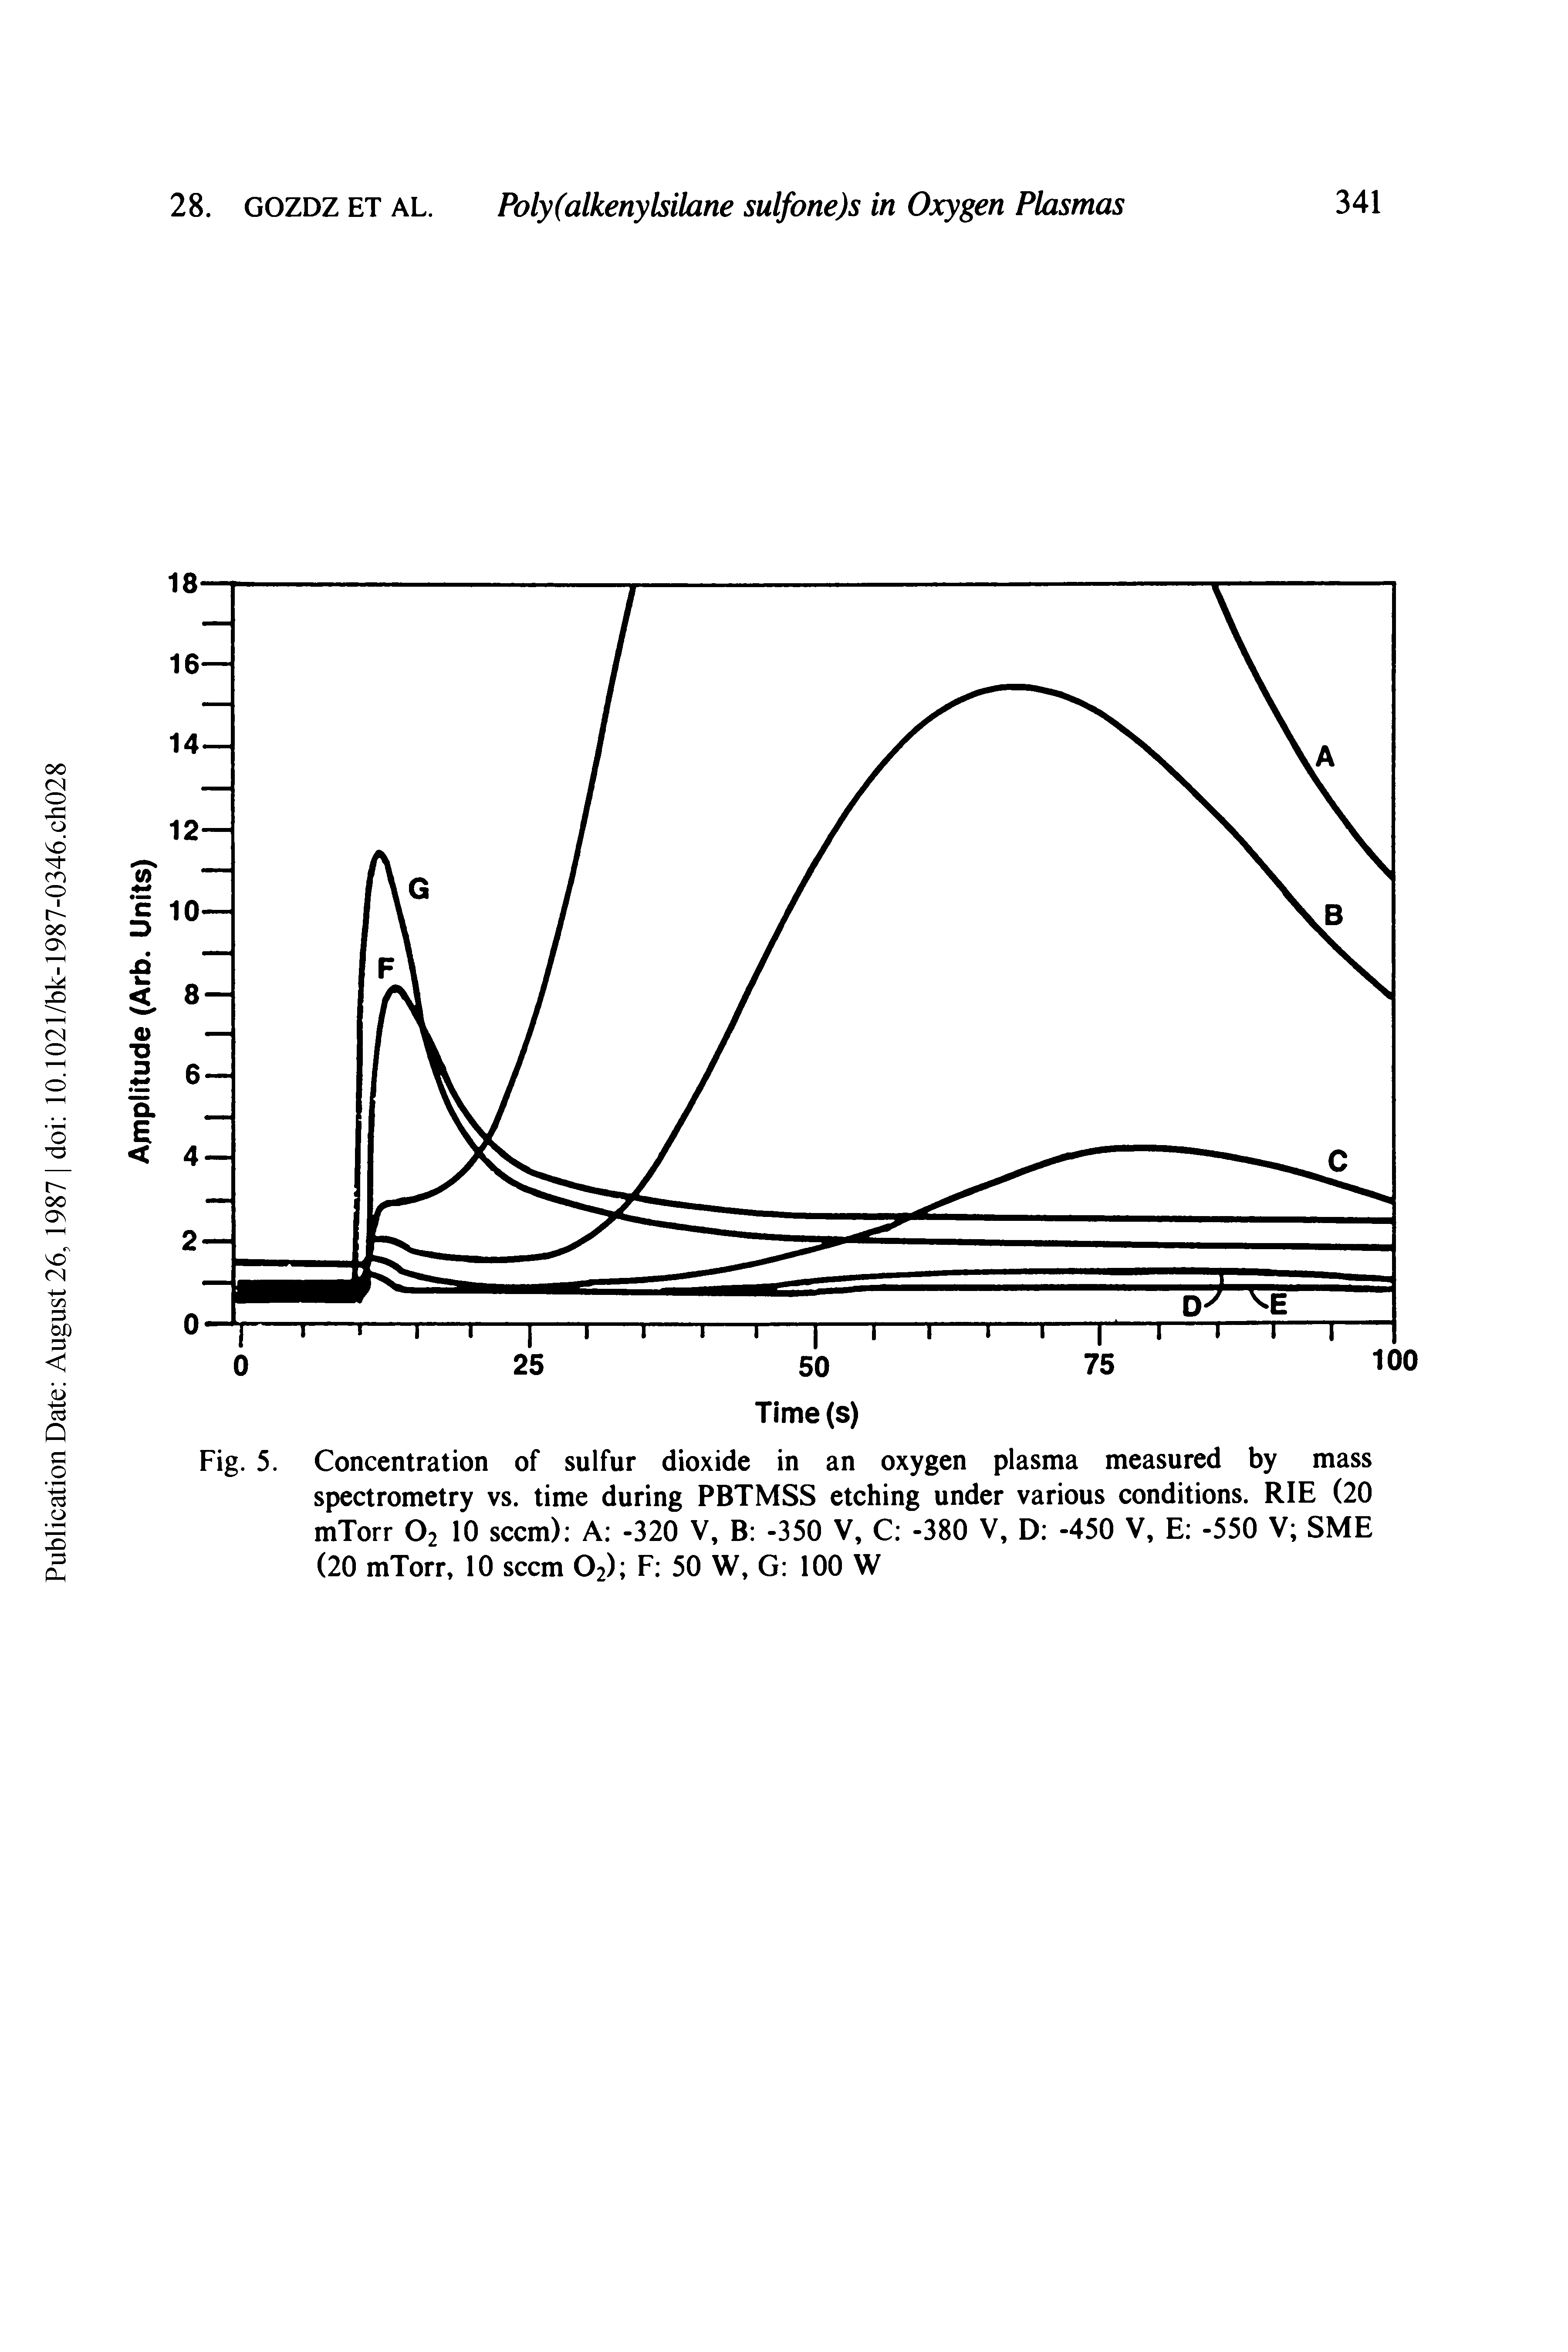 Fig. 5. Concentration of sulfur dioxide in an oxygen plasma measured by mass spectrometry vs. time during PBTMSS etching under various conditions. RIE (20 mTorr Oj 10 seem) A -320 V, B -350 V, C -380 V, D -450 V, E -550 V SME (20 mTorr, 10 seem Oj) F 50 W, G 100 W...